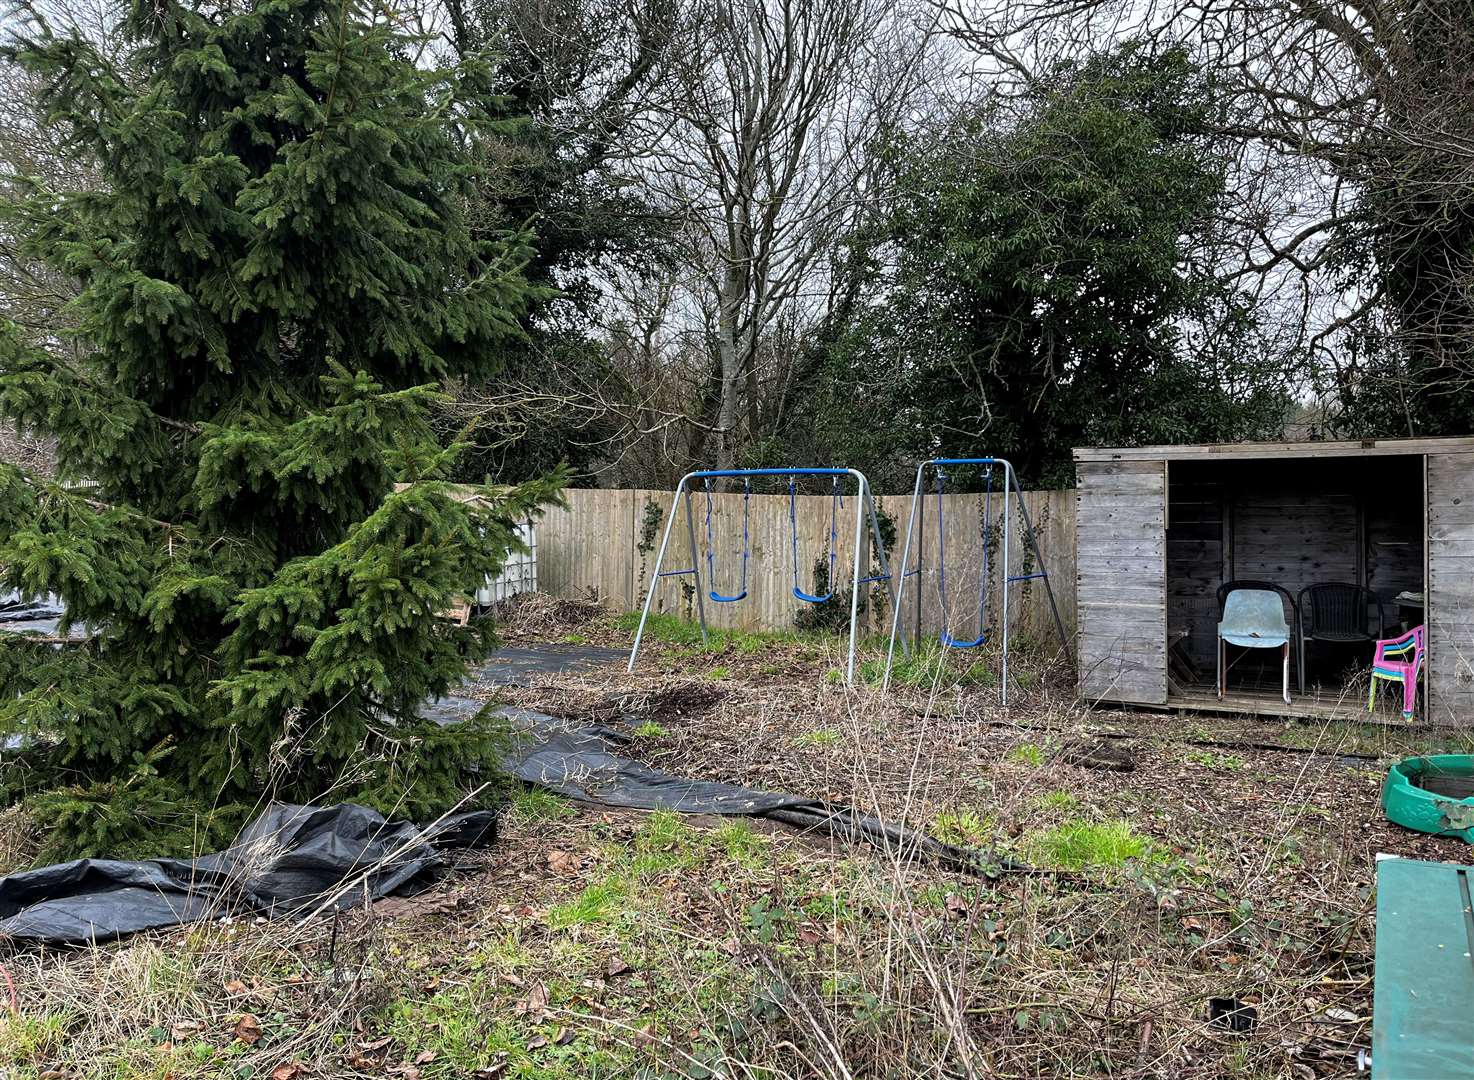 There are plans to add a children's area for digging and planting in New Ash Green Allotments